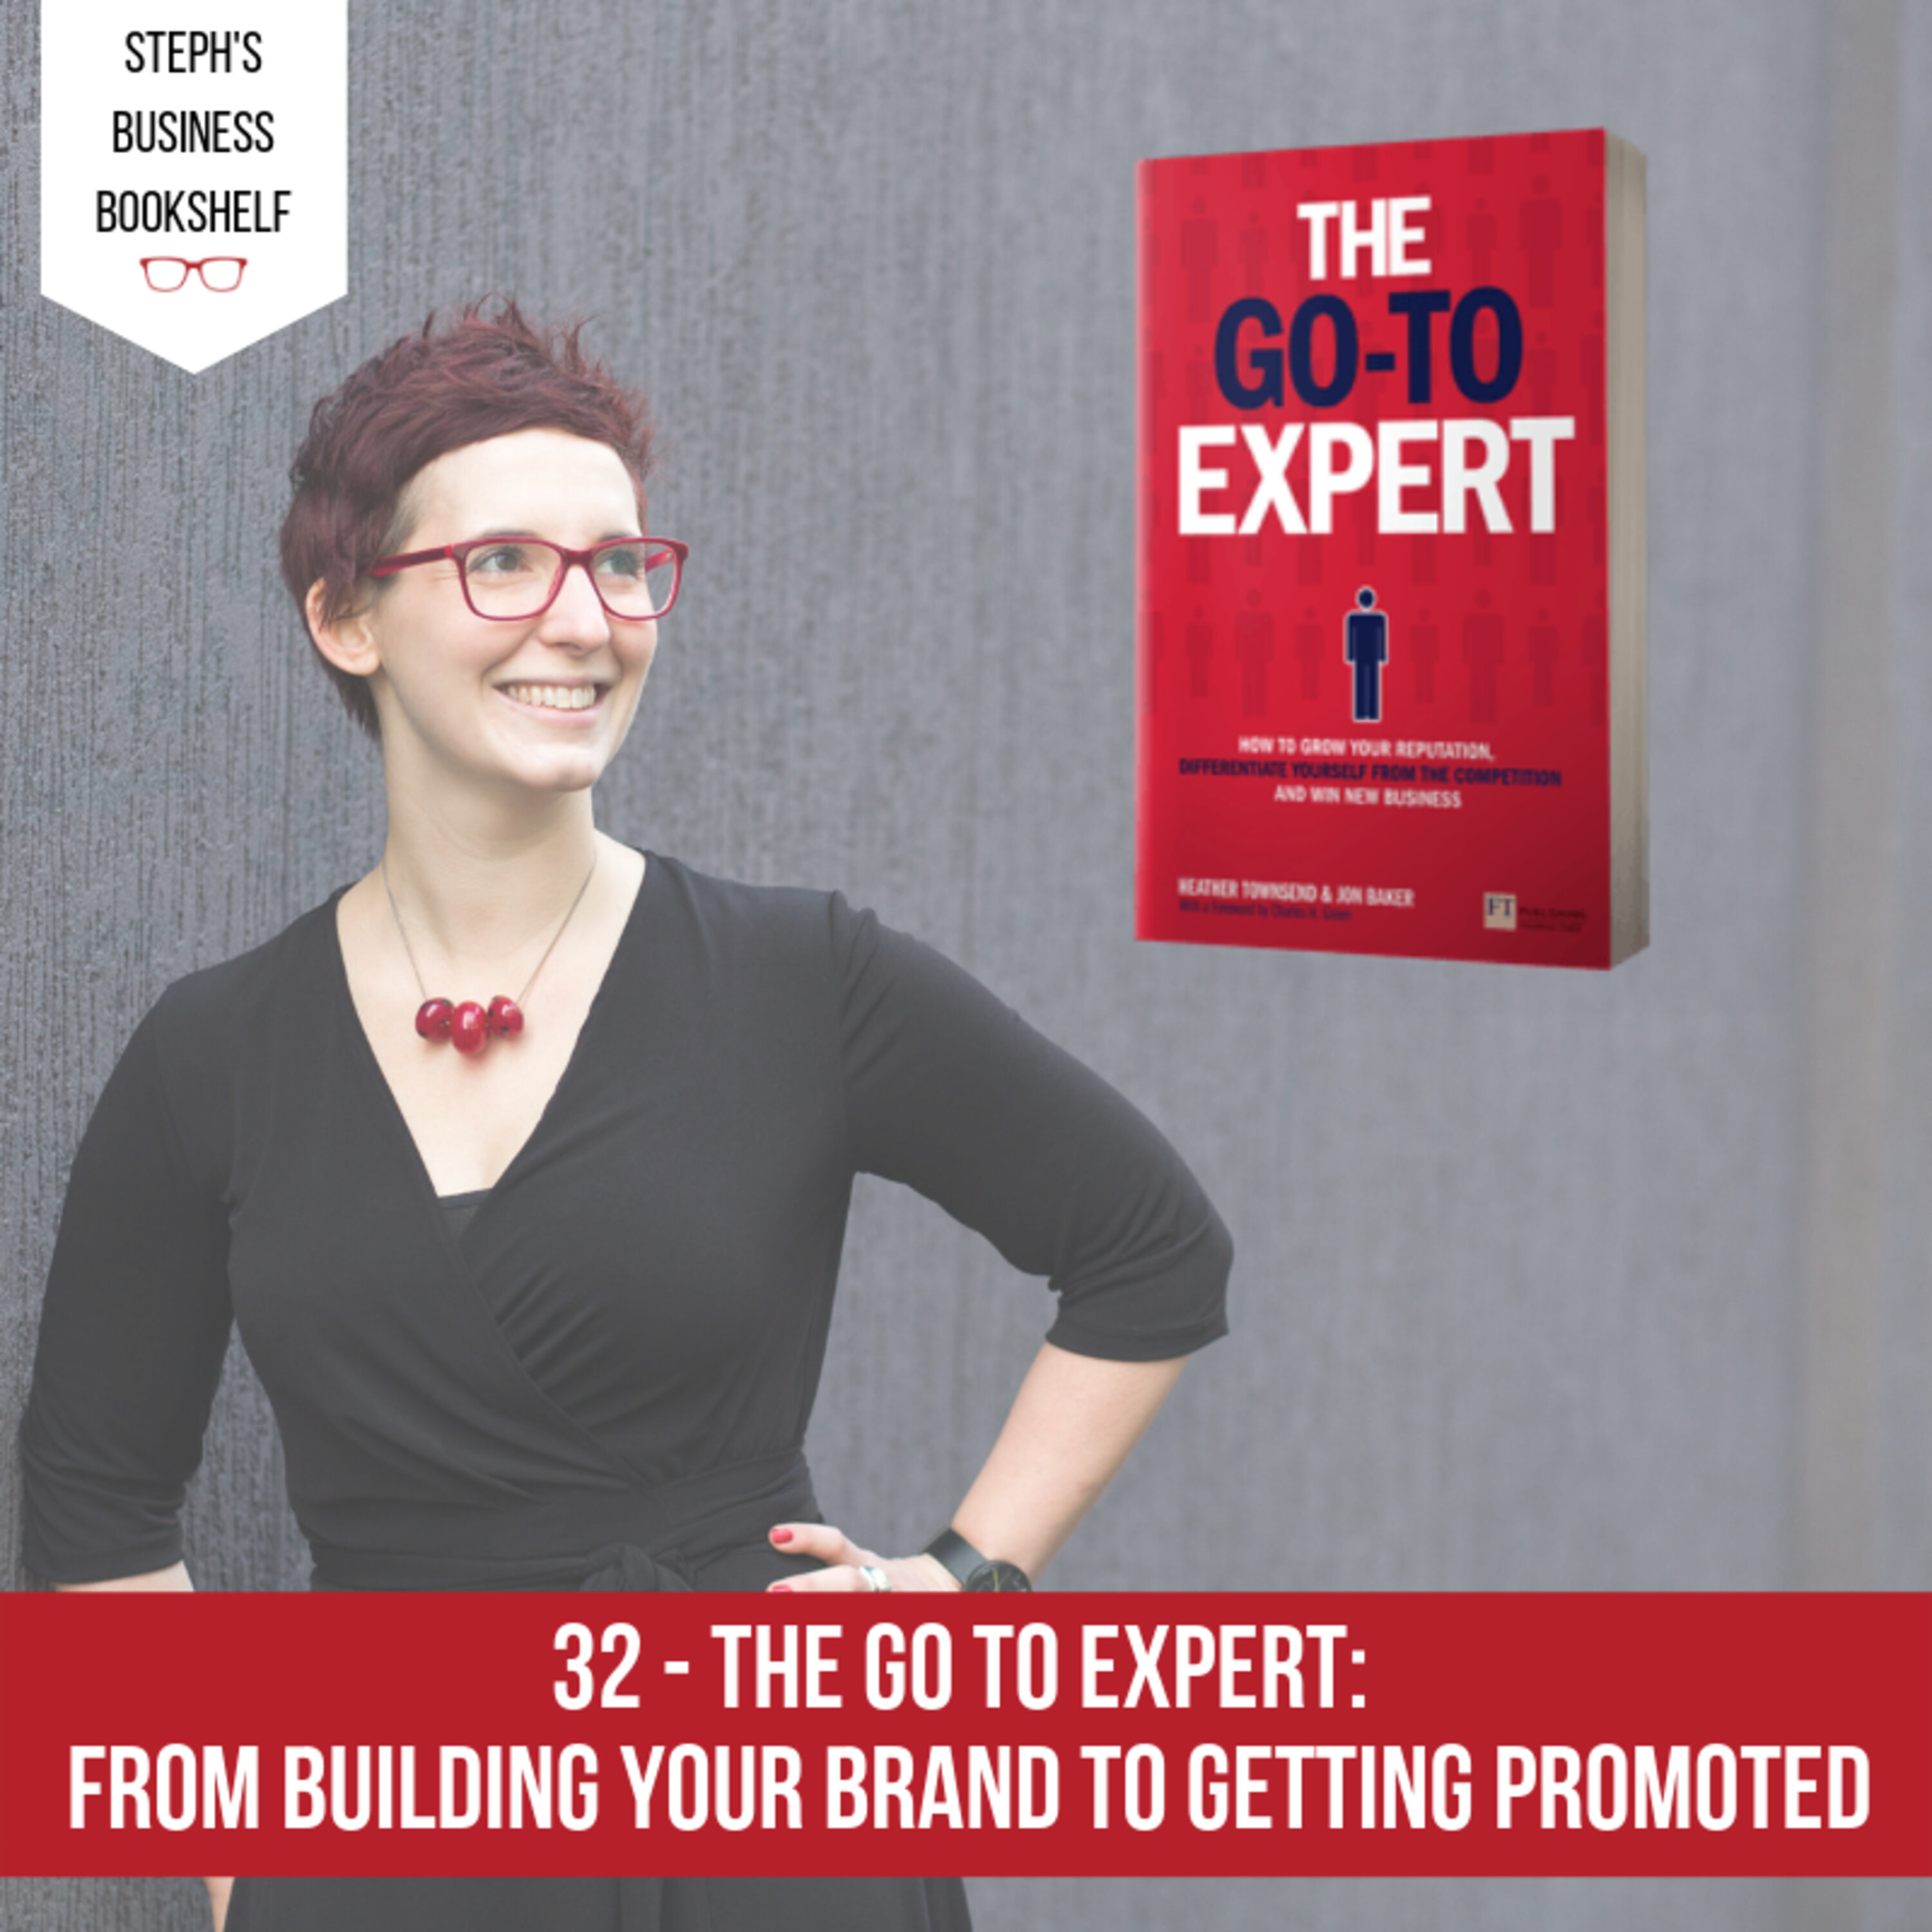 The Go To Expert by Heather Townsend & Jon Baker: From building your brand to getting promoted